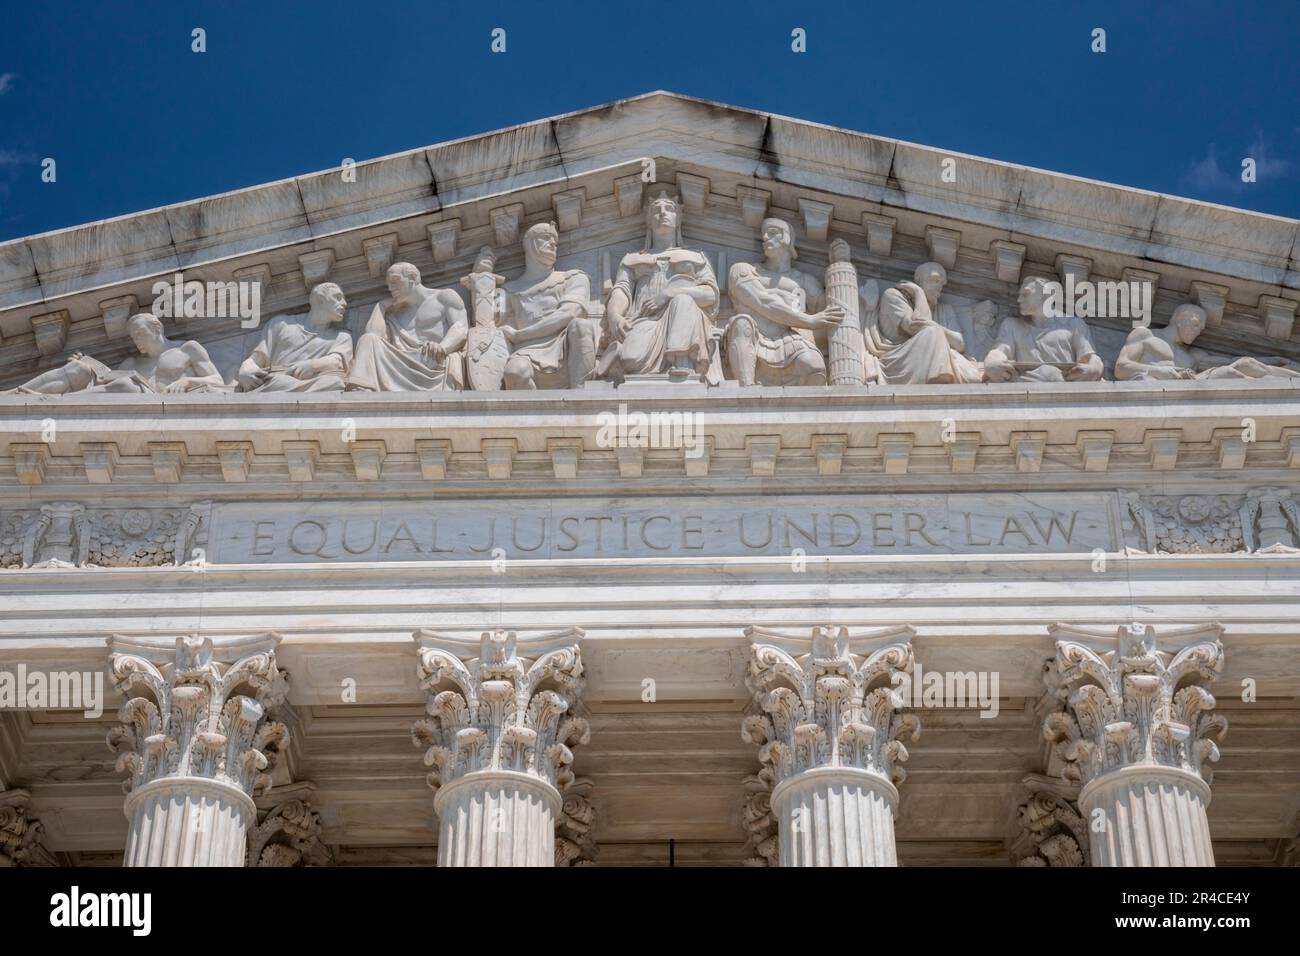 Washington, DC - 'Equal Justice Under Law' engraved on the front of the U.S. Supreme Court. Stock Photo